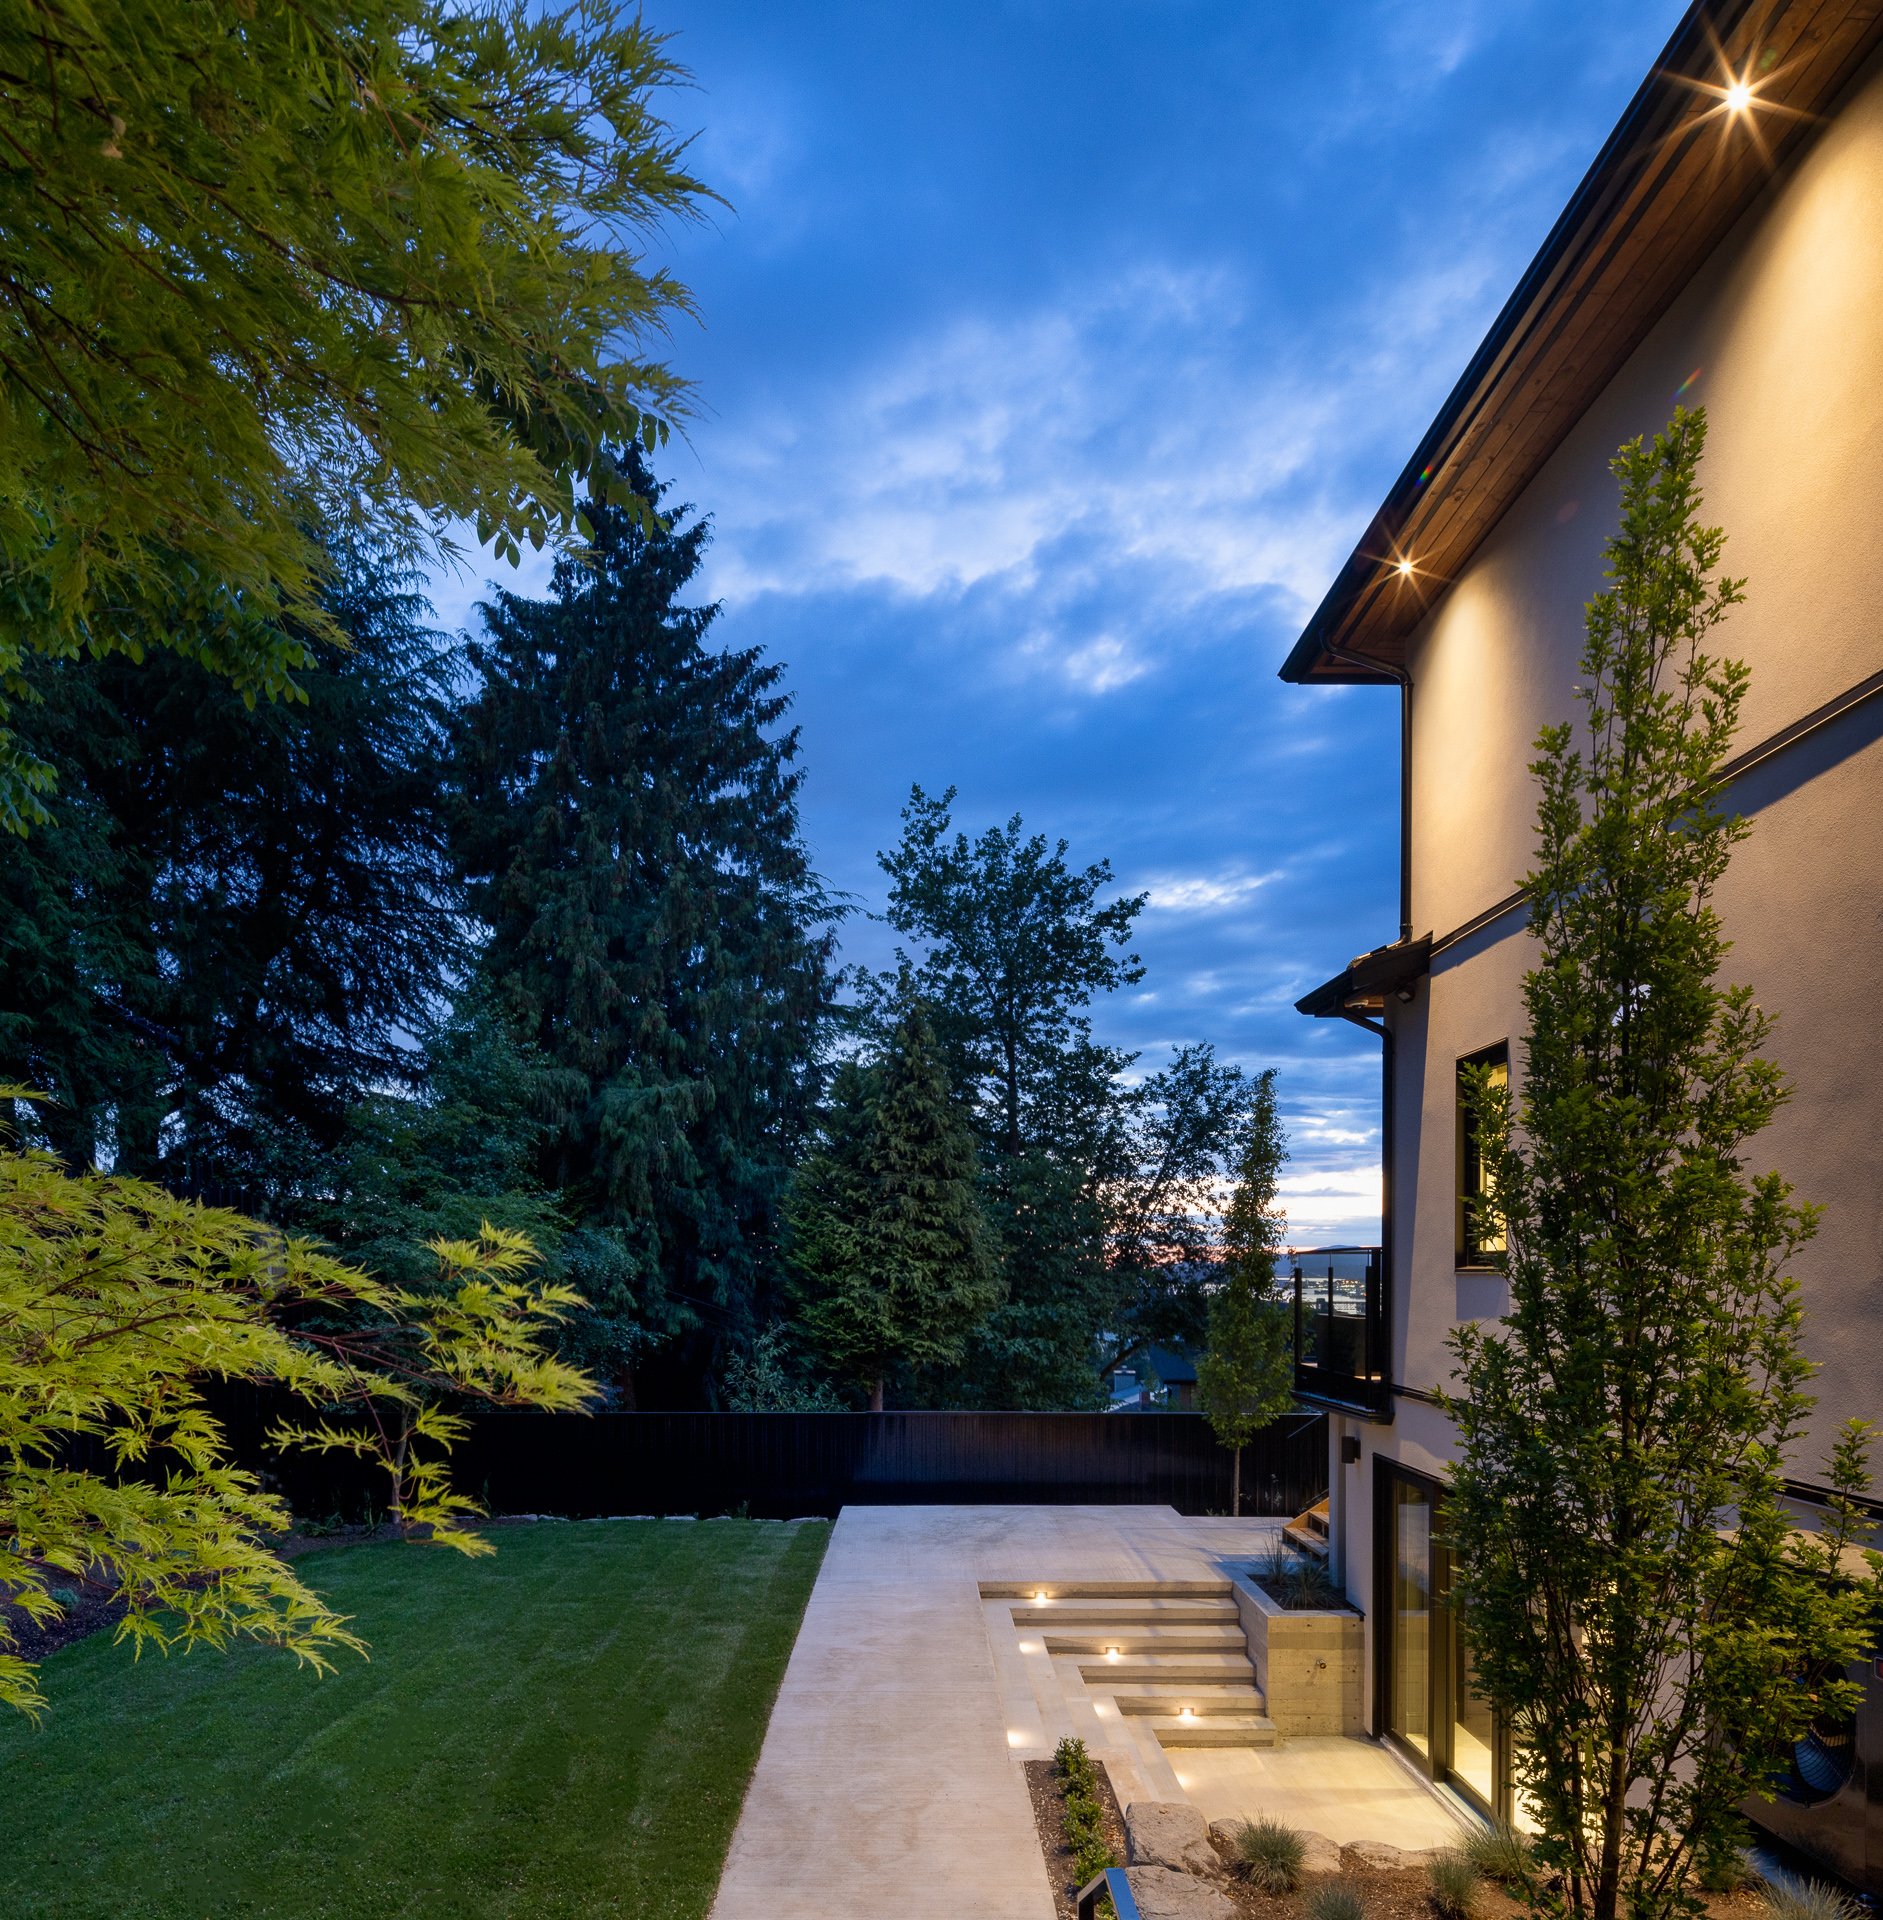 295-N-Delta-Ave-Burnaby-360hometours-169